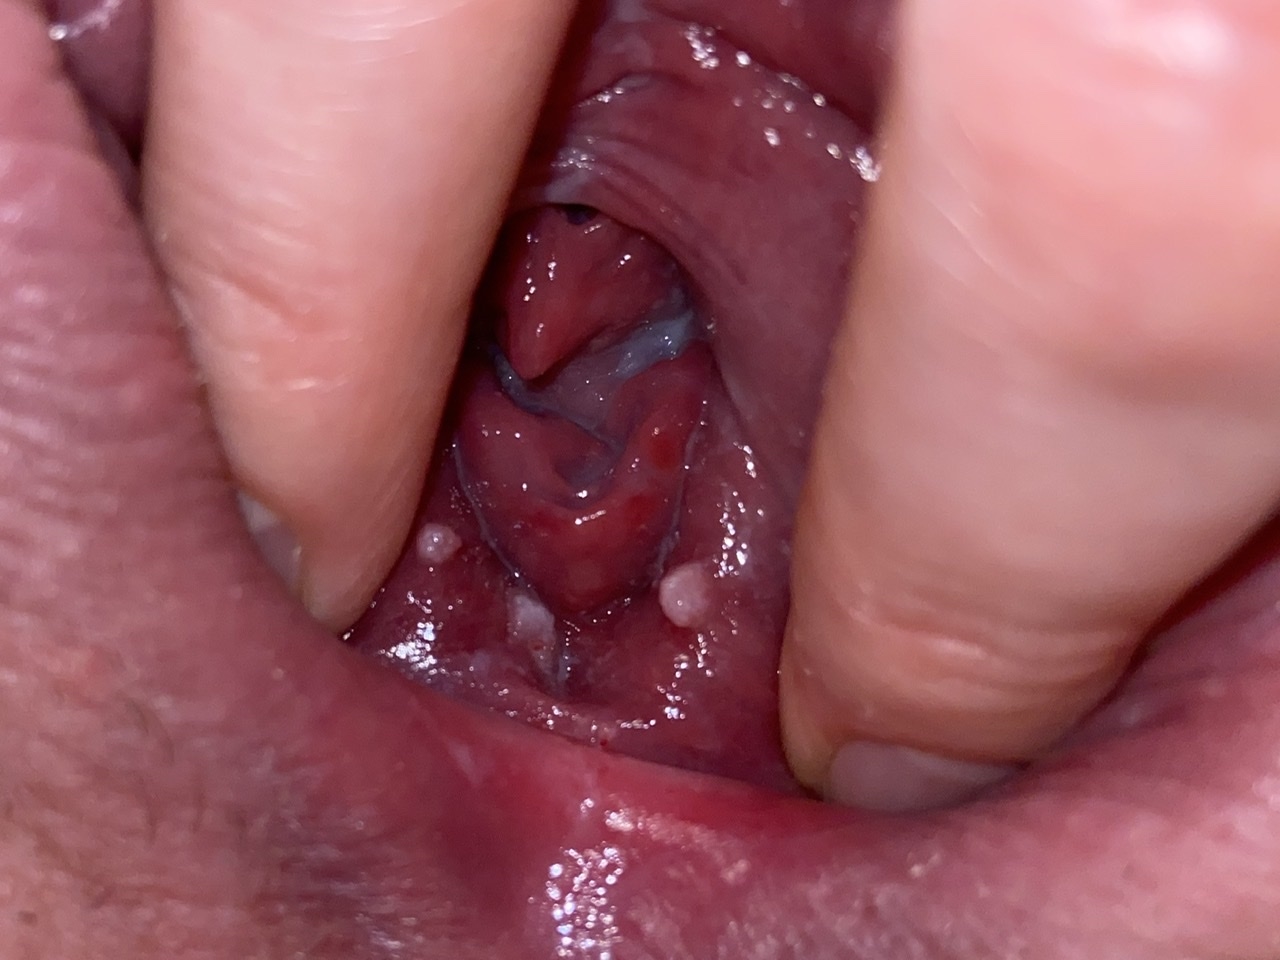 hpv warts when pregnant